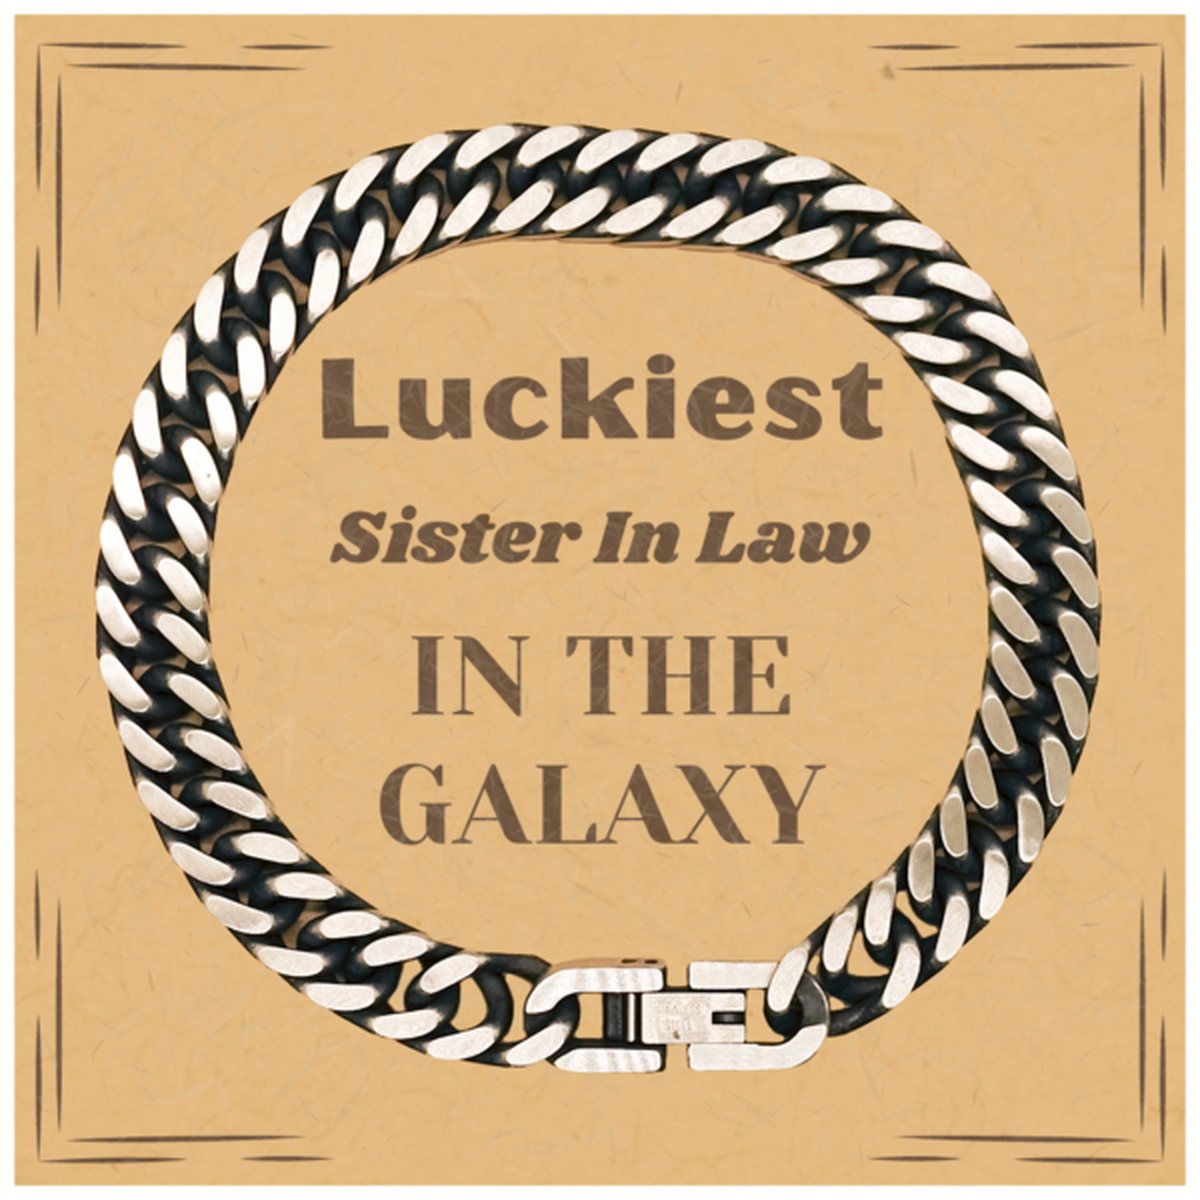 Luckiest Sister In Law in the Galaxy, To My Sister In Law Message Card Gifts, Christmas Sister In Law Cuban Link Chain Bracelet Gifts, X-mas Birthday Unique Gifts For Sister In Law Men Women